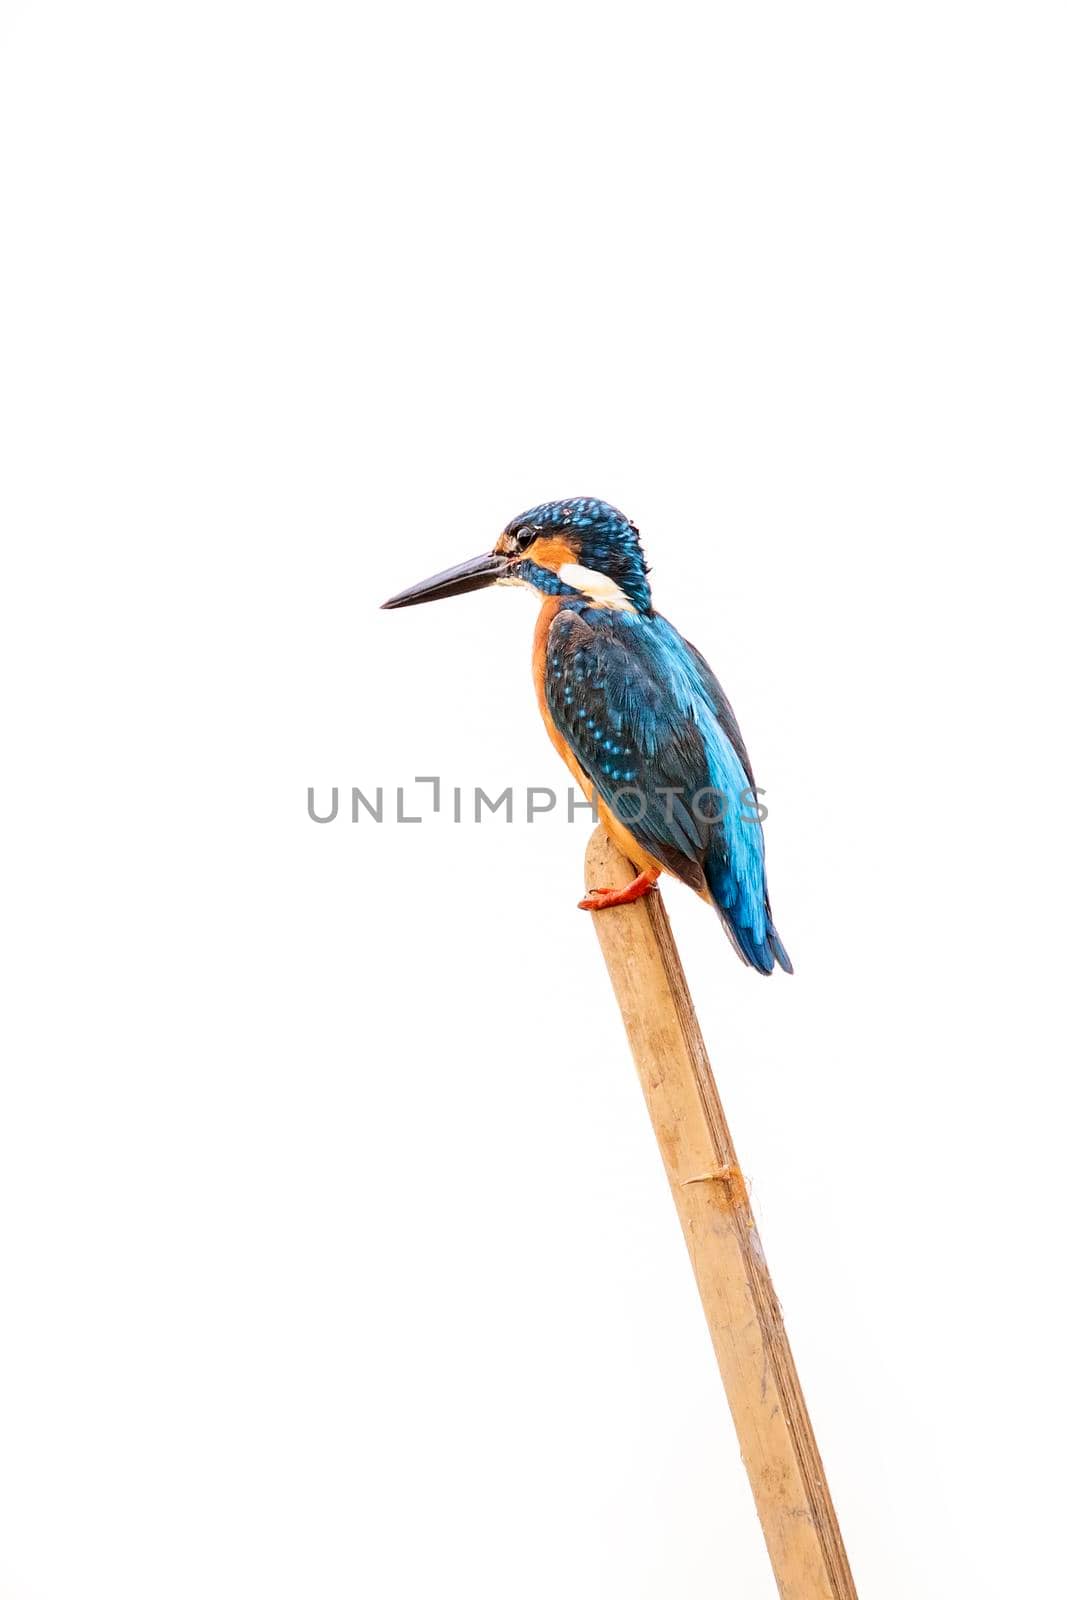 Image of common kingfisher (Alcedo atthis) perched on a branch on white background. Bird. Animals.